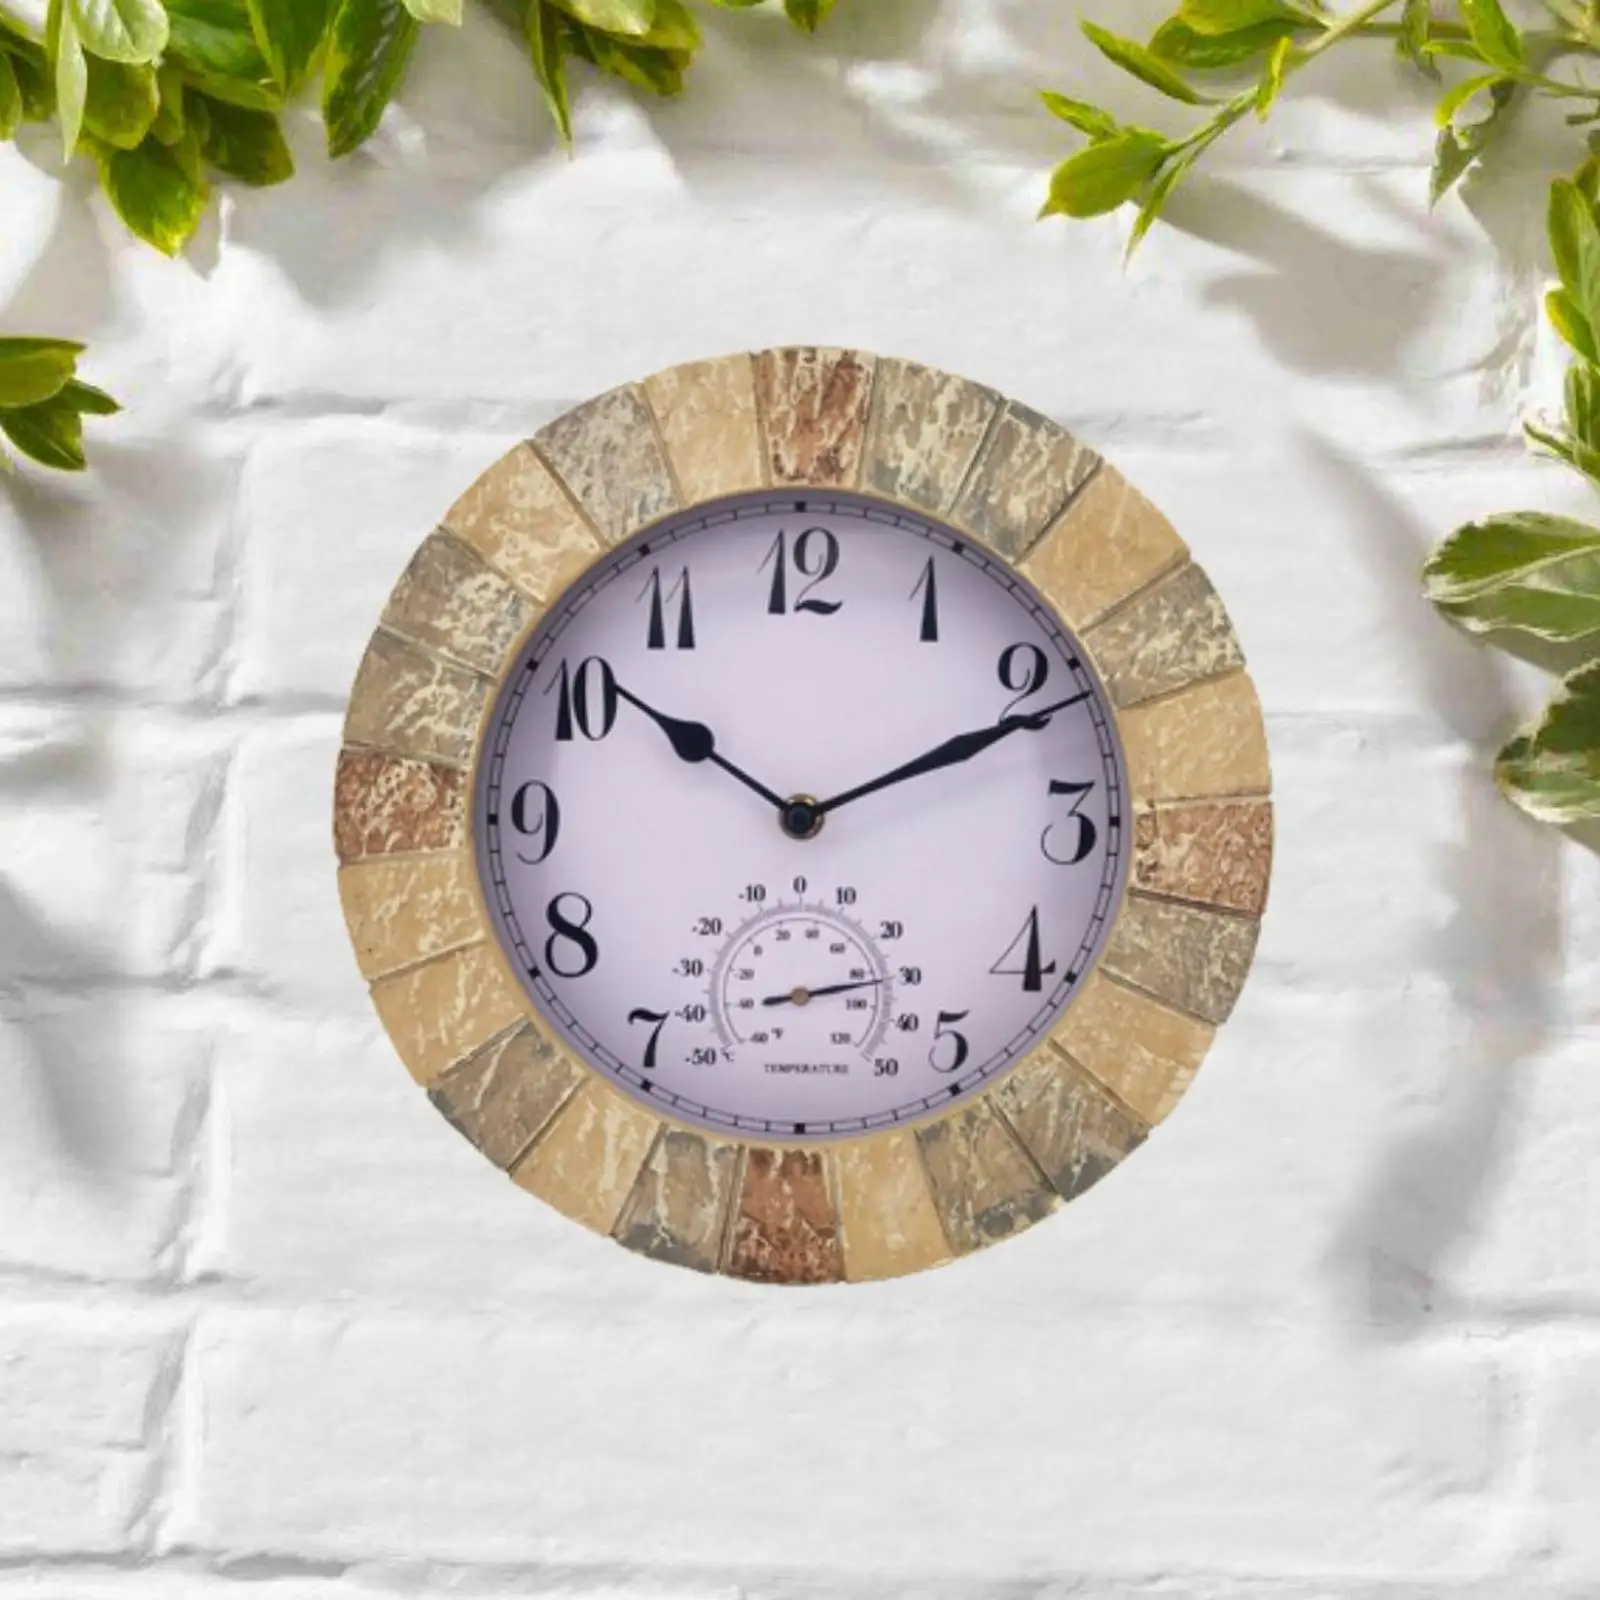 Outdoor Wall Clock Waterproof with Temperature for Garden Pool Decorative